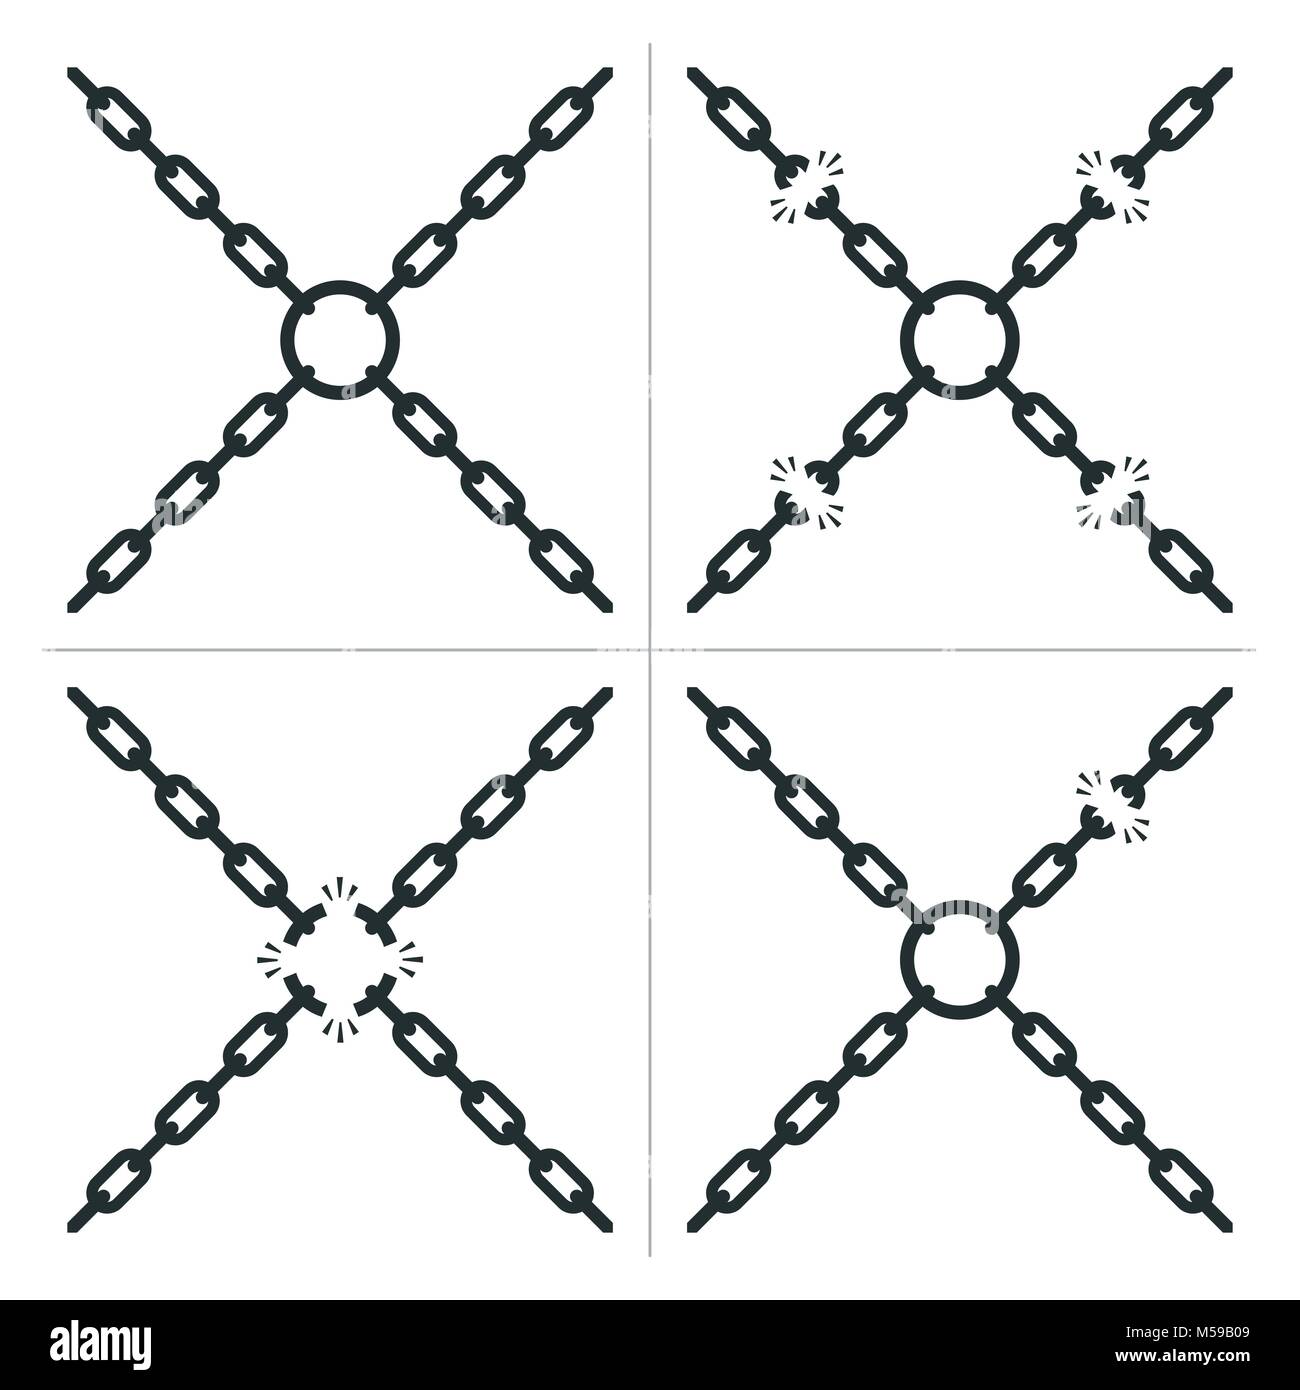 Four chains with breaks in the links joined by a center ring with four different variations, one without any breaks, in a safety and security or freed Stock Vector